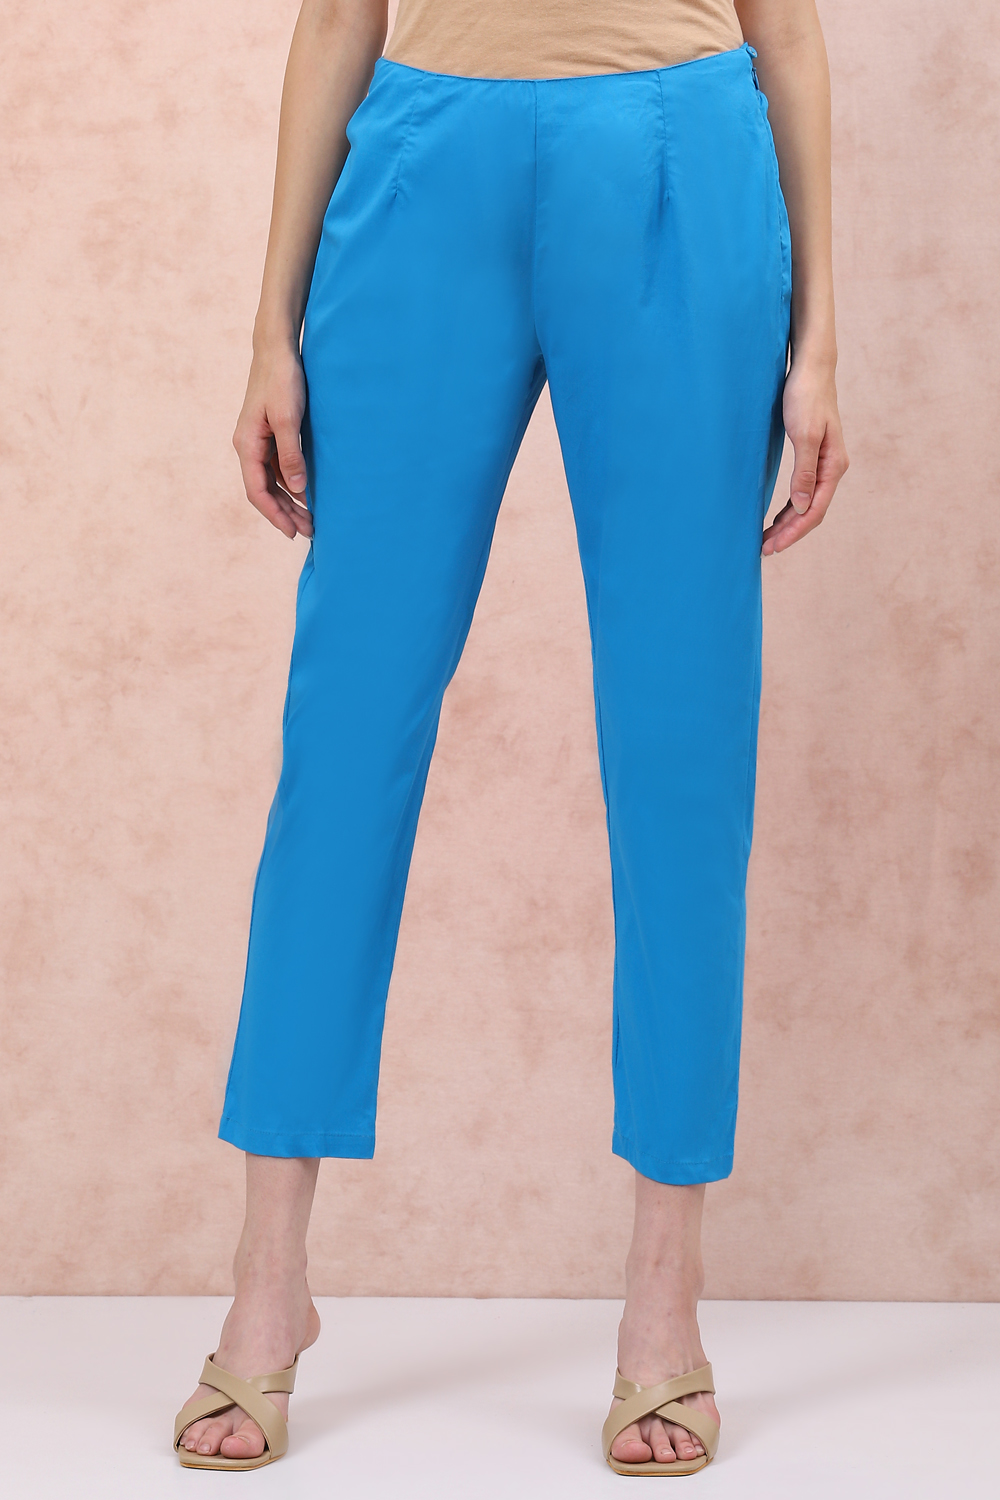 Light Pink Cotton Fusion Pants image number 0